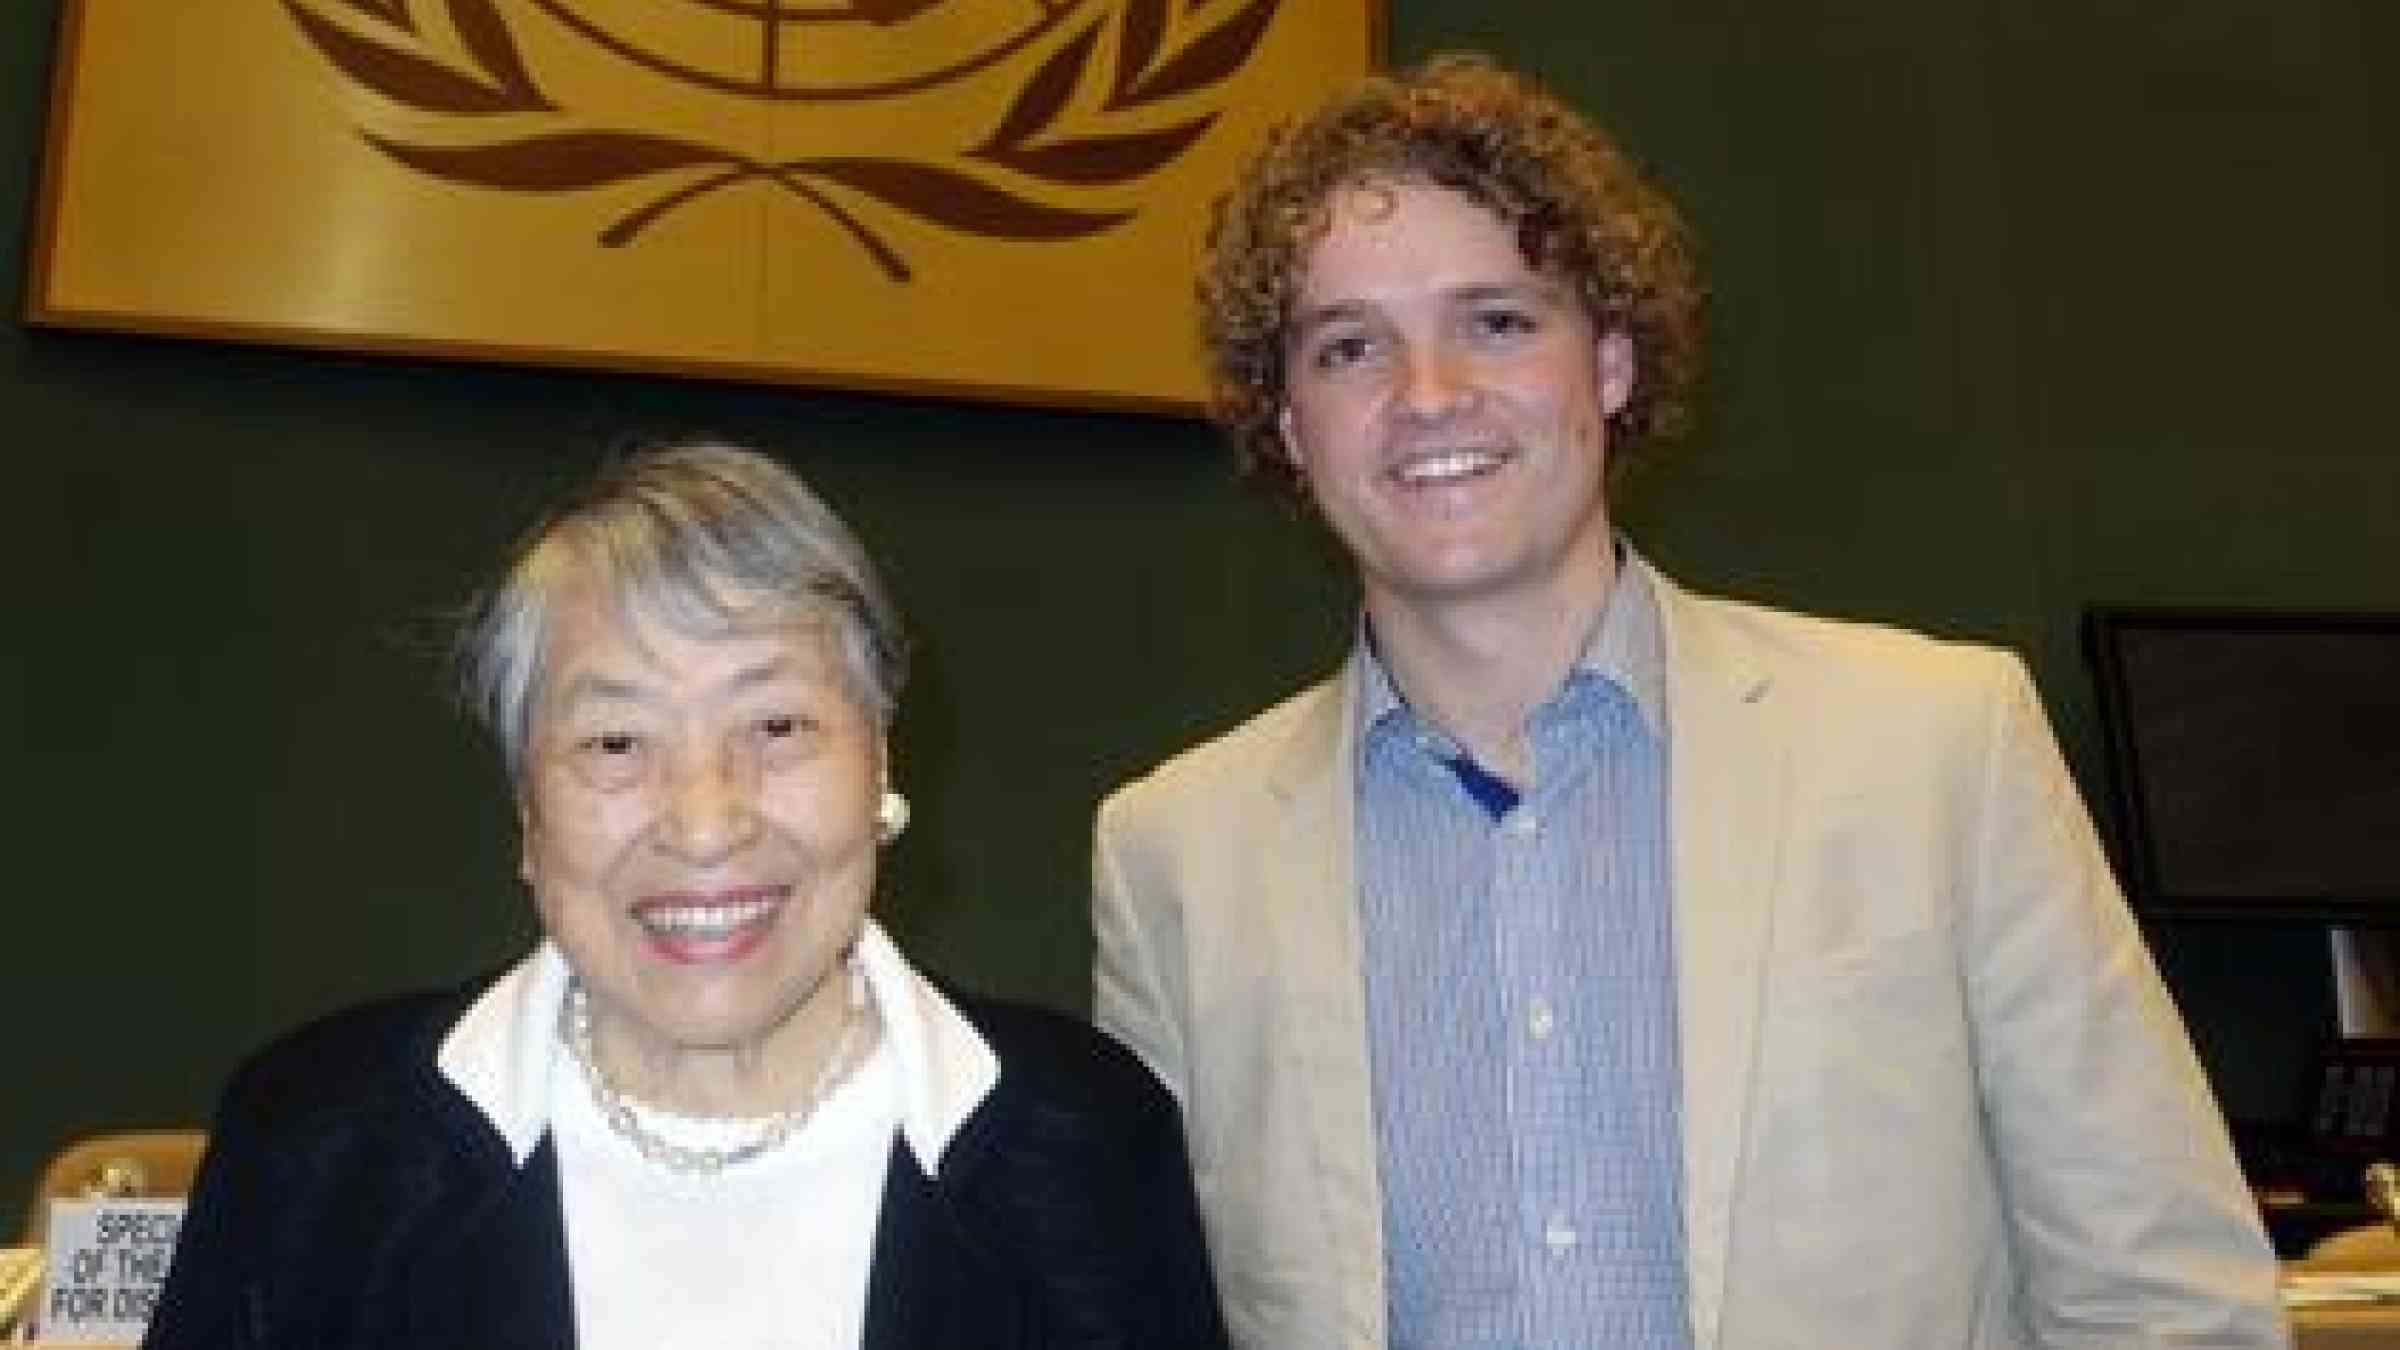 The former Japanese politician Akiko Domoto was two weeks shy of her 82nd birthday when she spoke on behalf of Women's Groups  at last month's Preparatory Committee Meeting for the 3rd UN World Conference on Disaster Risk Reduction in Geneva. She is accompanied here by Sam Johnson from New Zealand who spoke on behalf of Youth. Sam will be one of the two billion people over 60 by the year  2050. (Photo: UNISDR/Denis McClean)